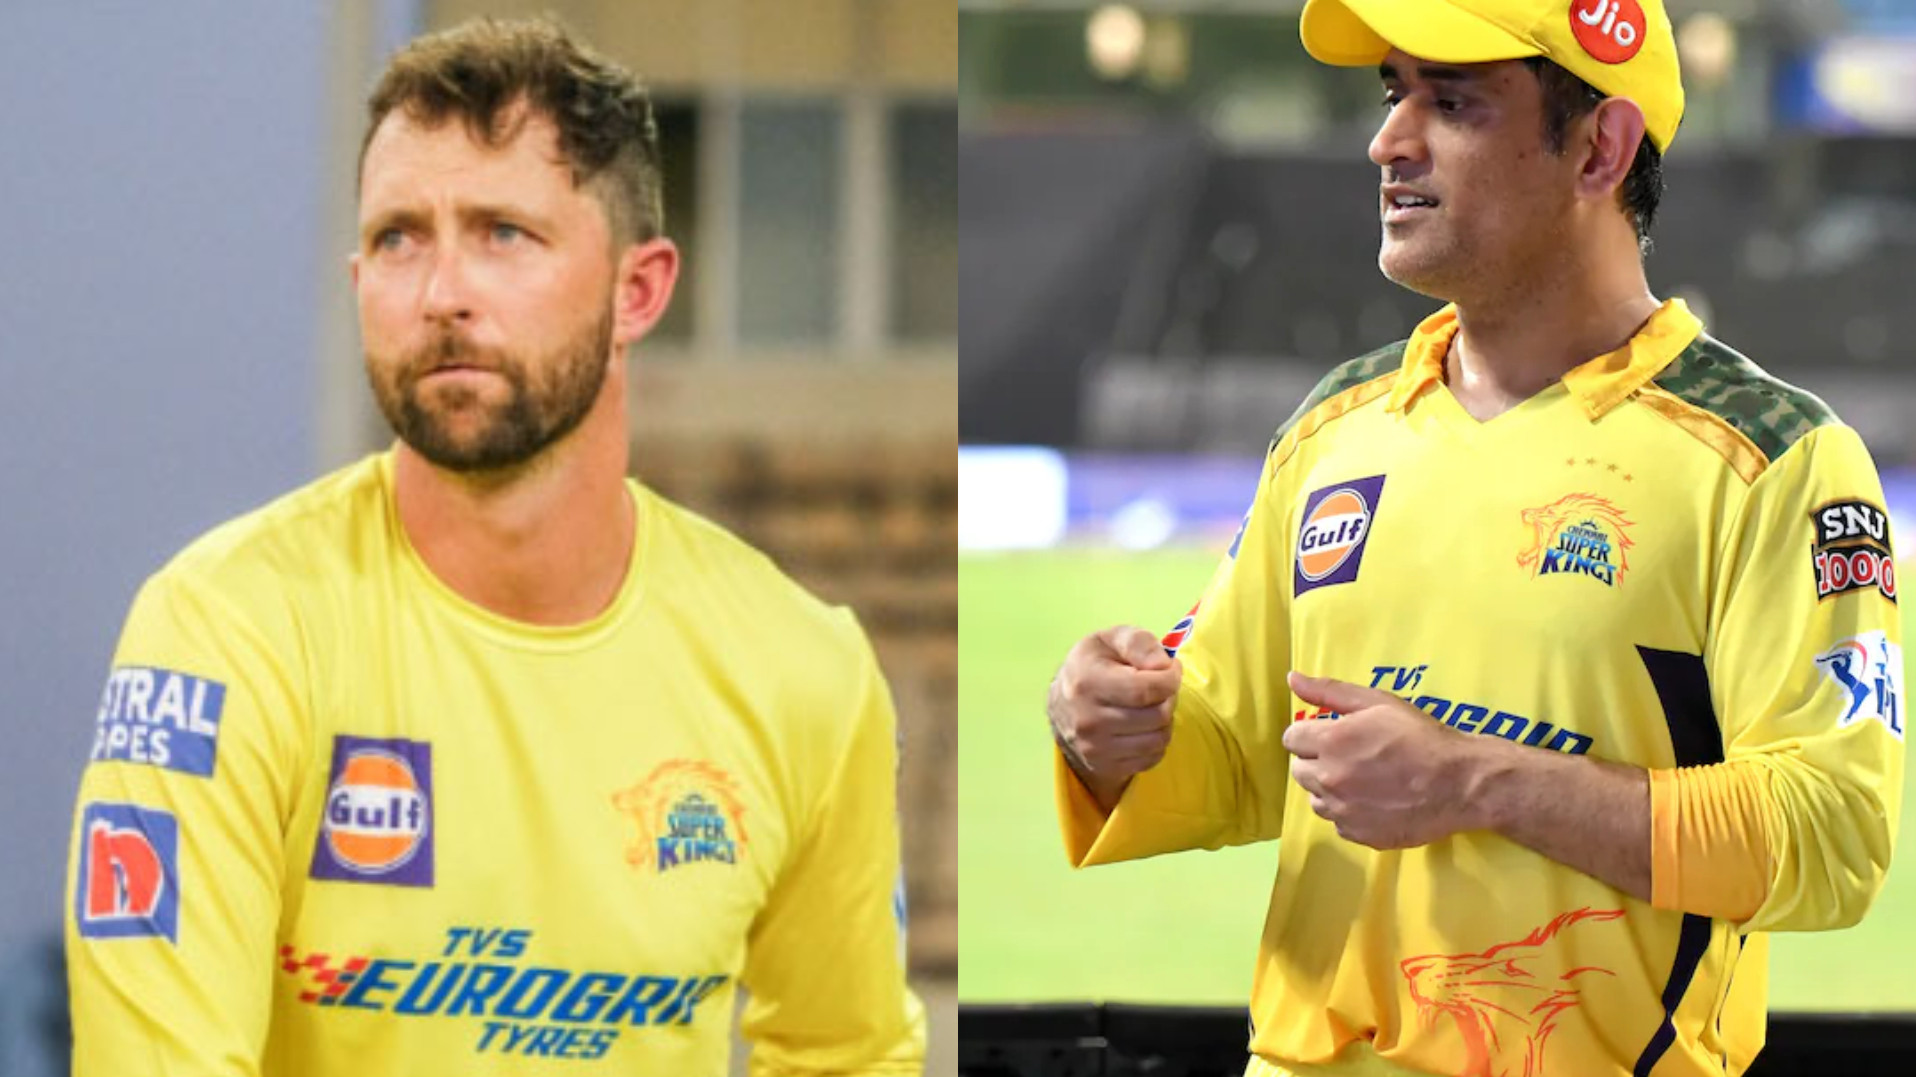 IPL 2022: Seeing crowd with CSK shirts with ‘Dhoni 7’ was pretty special- Devon Conway on his debut IPL